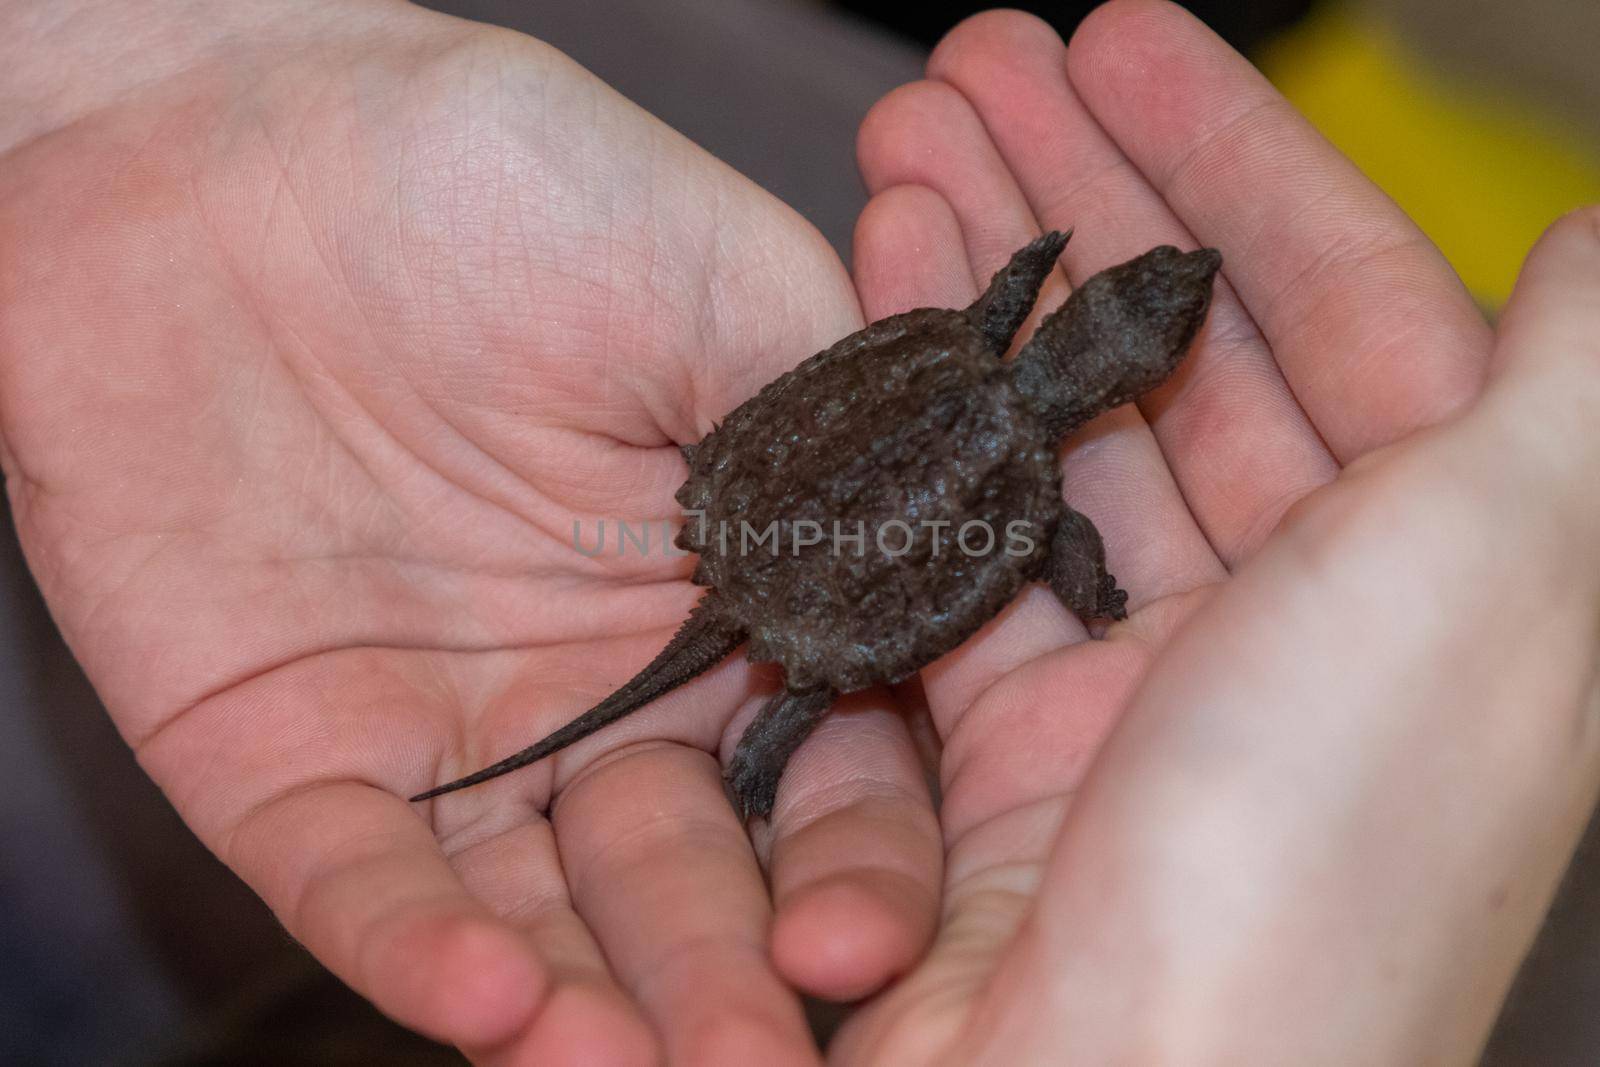 Kids holding a Baby snapping turtle close up . High quality photo